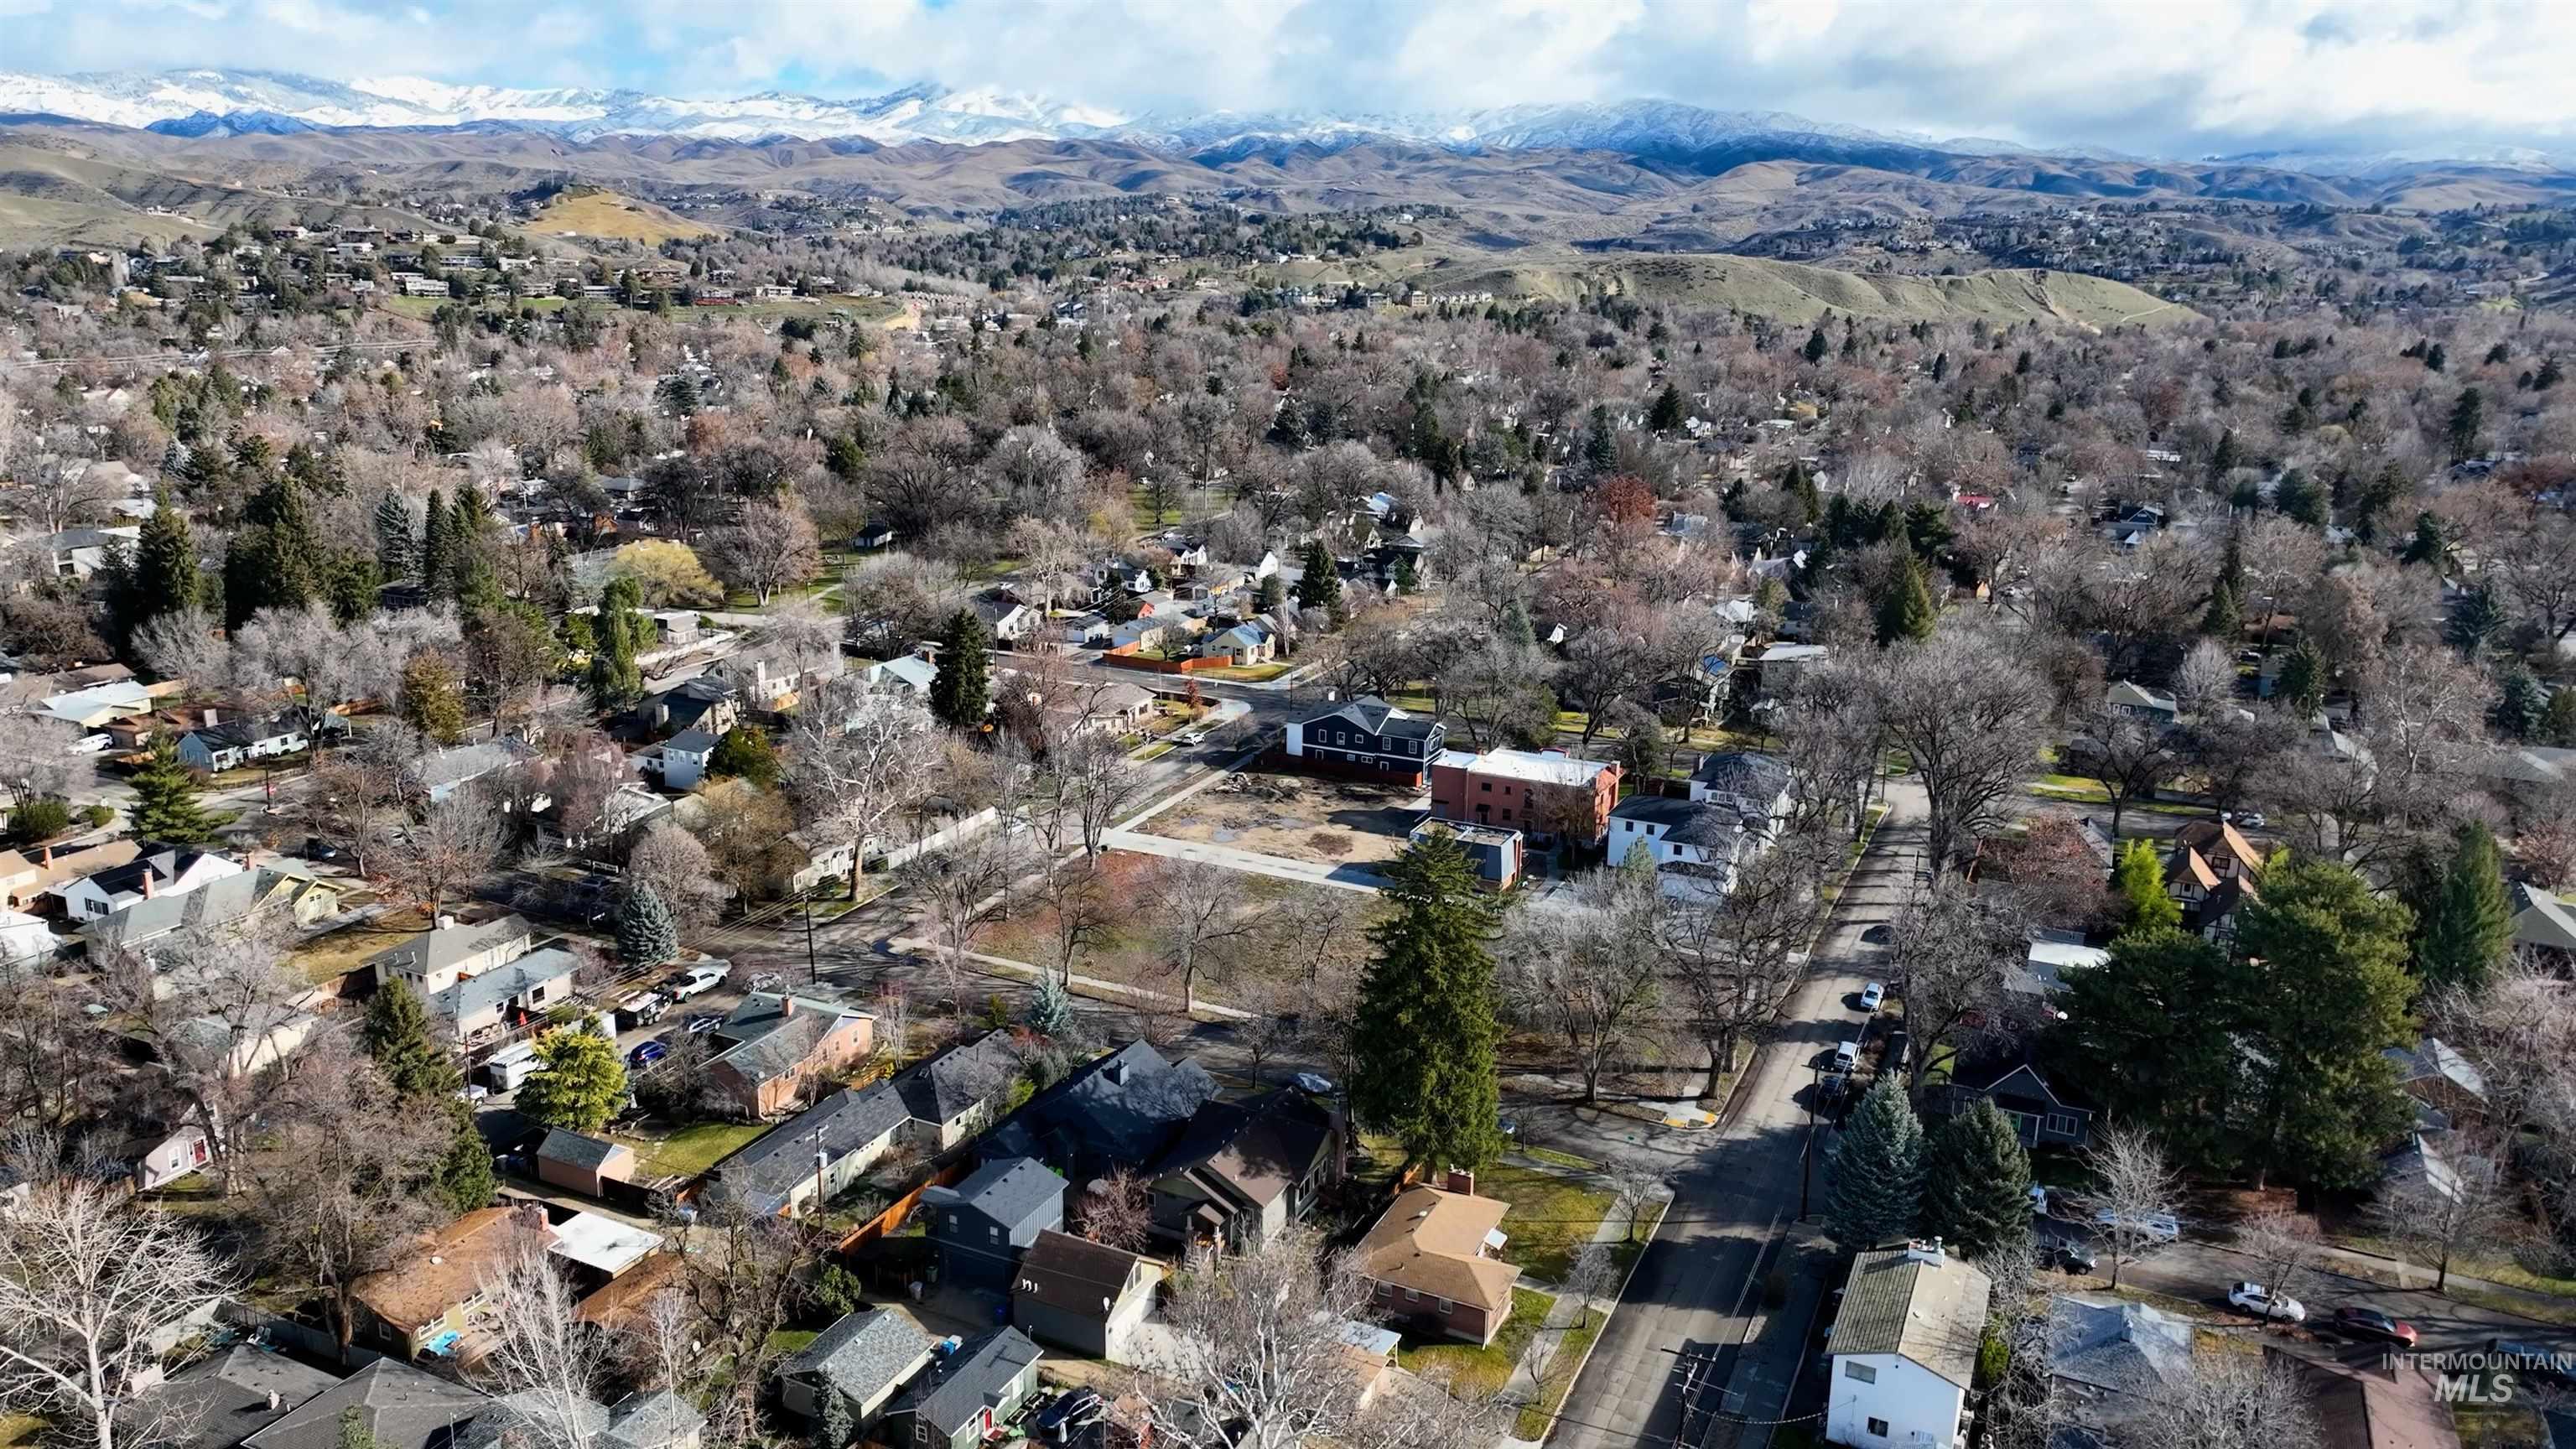 1622 N 25th St., Boise, Idaho 83702, Land For Sale, Price $495,000,MLS 98902342